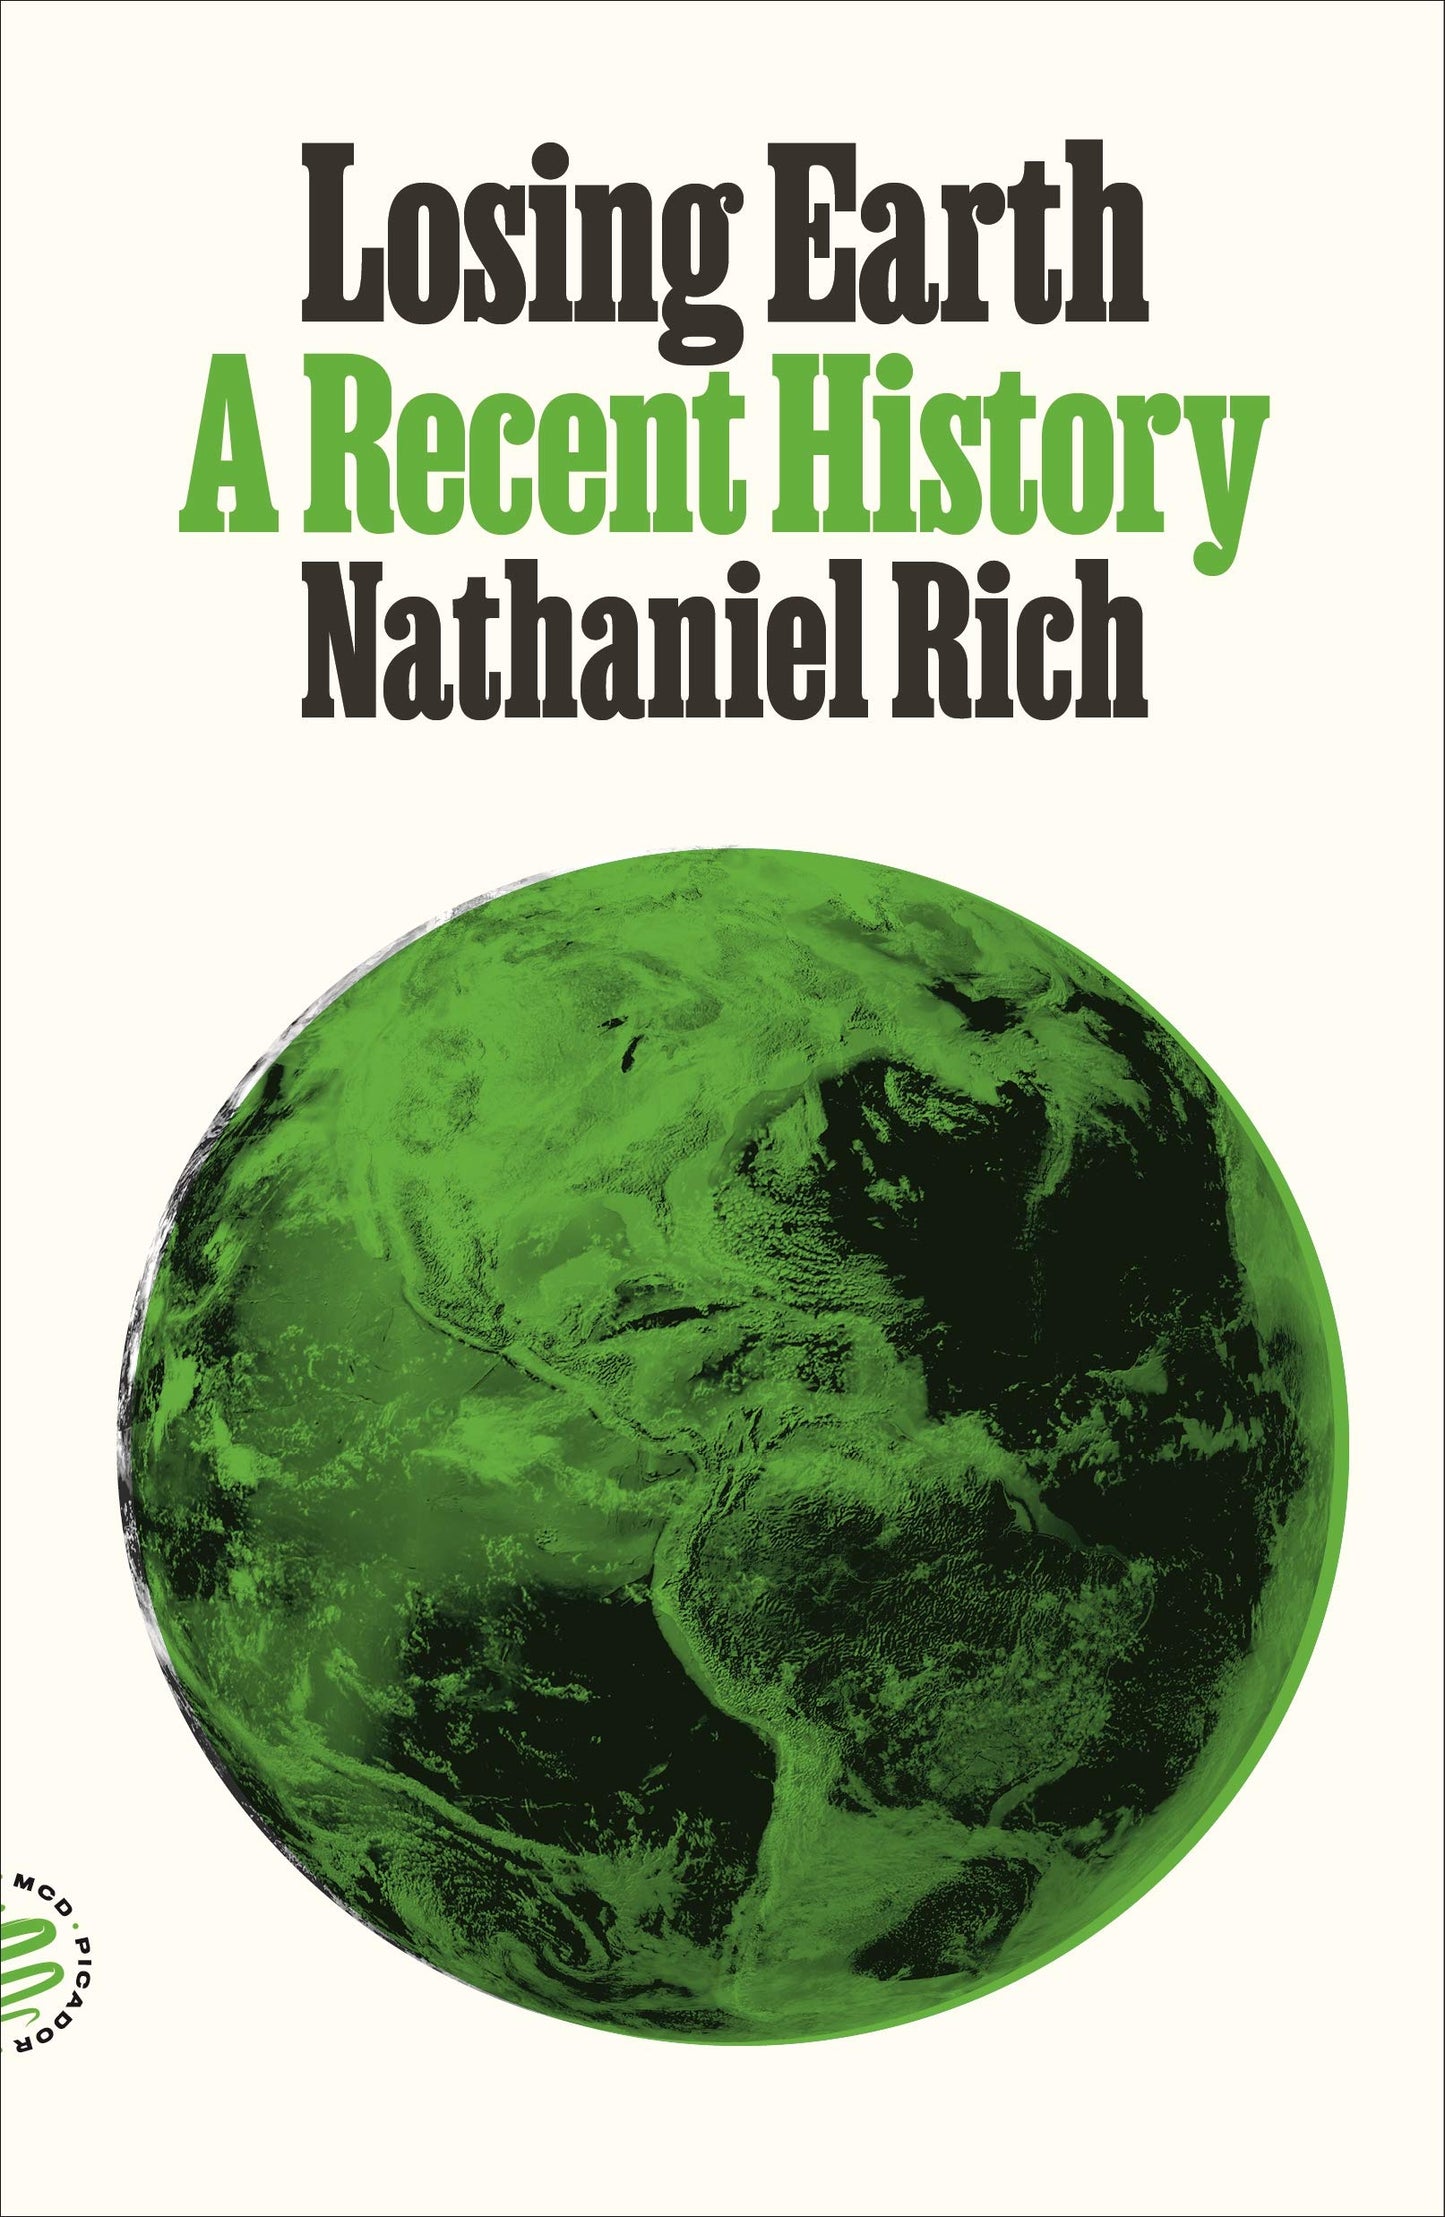 Losing Earth: A Recent History, by Nathaniel Rich